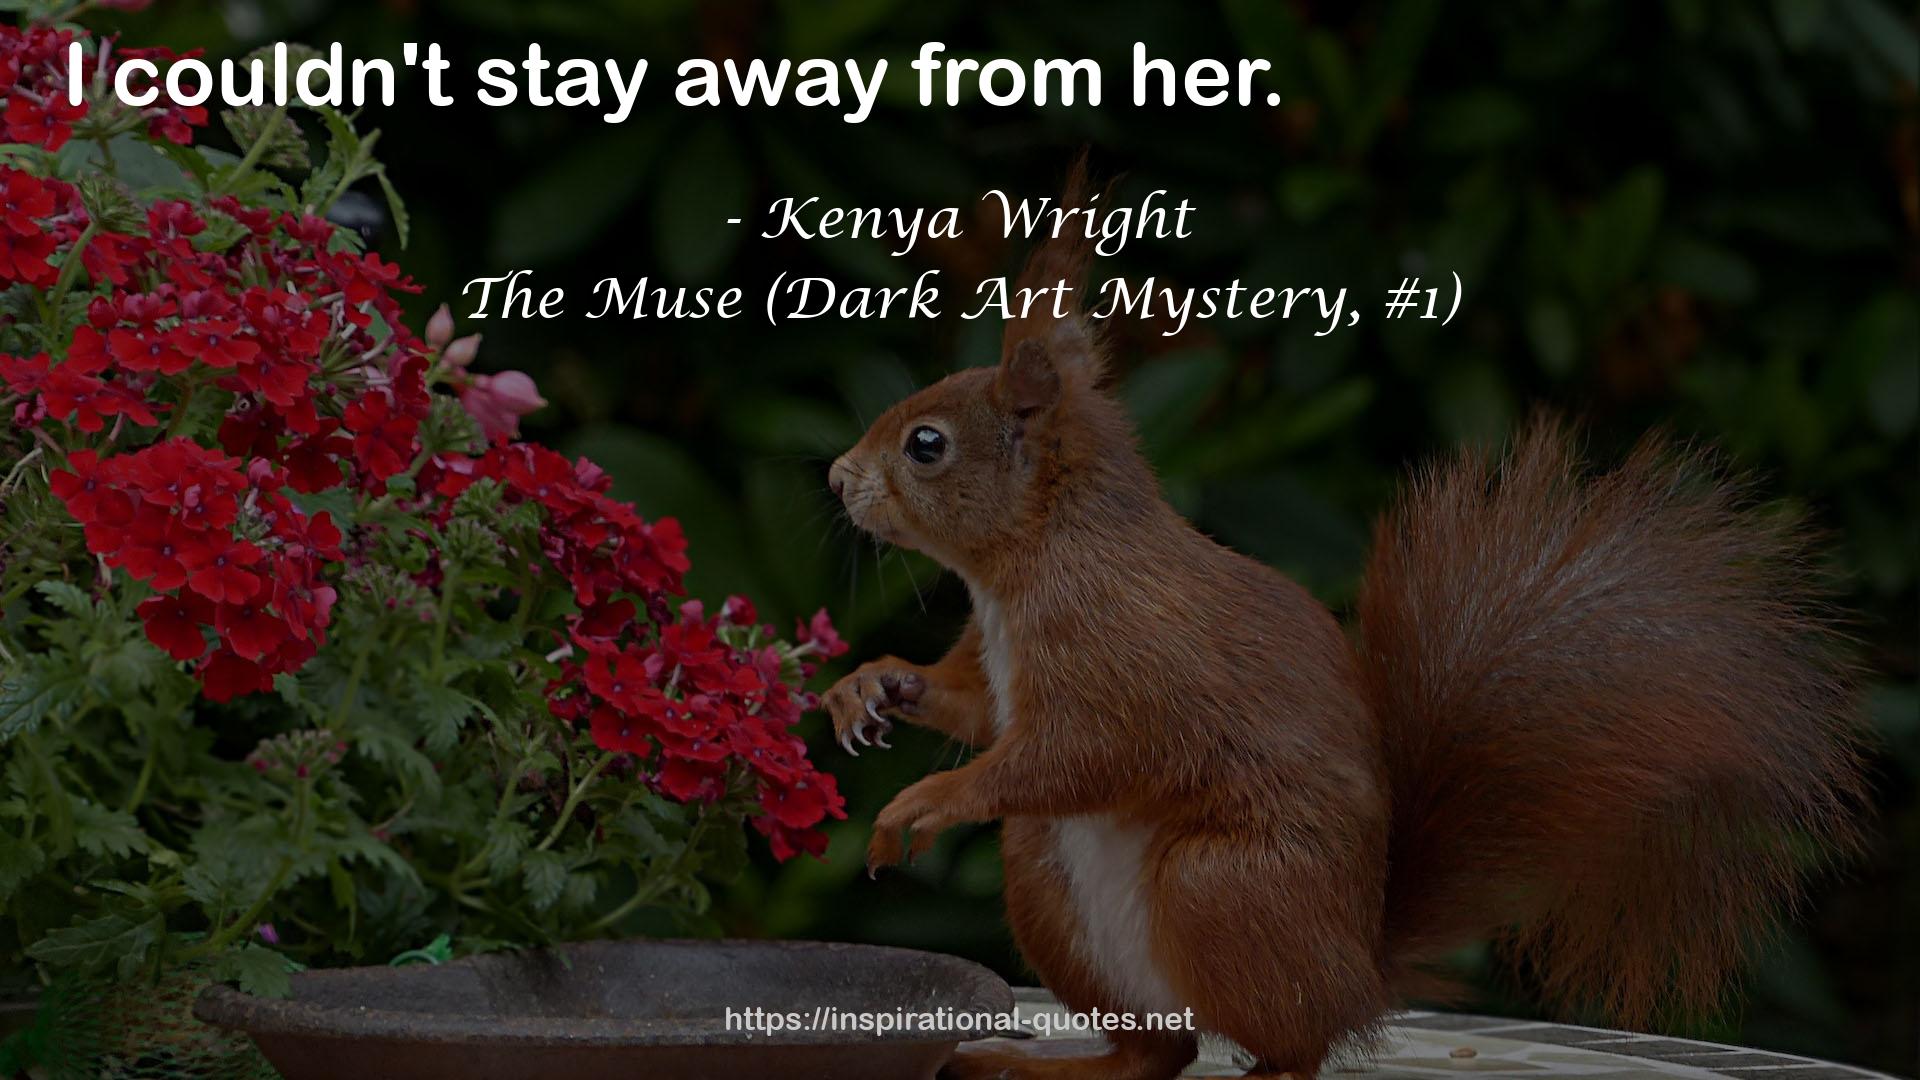 The Muse (Dark Art Mystery, #1) QUOTES